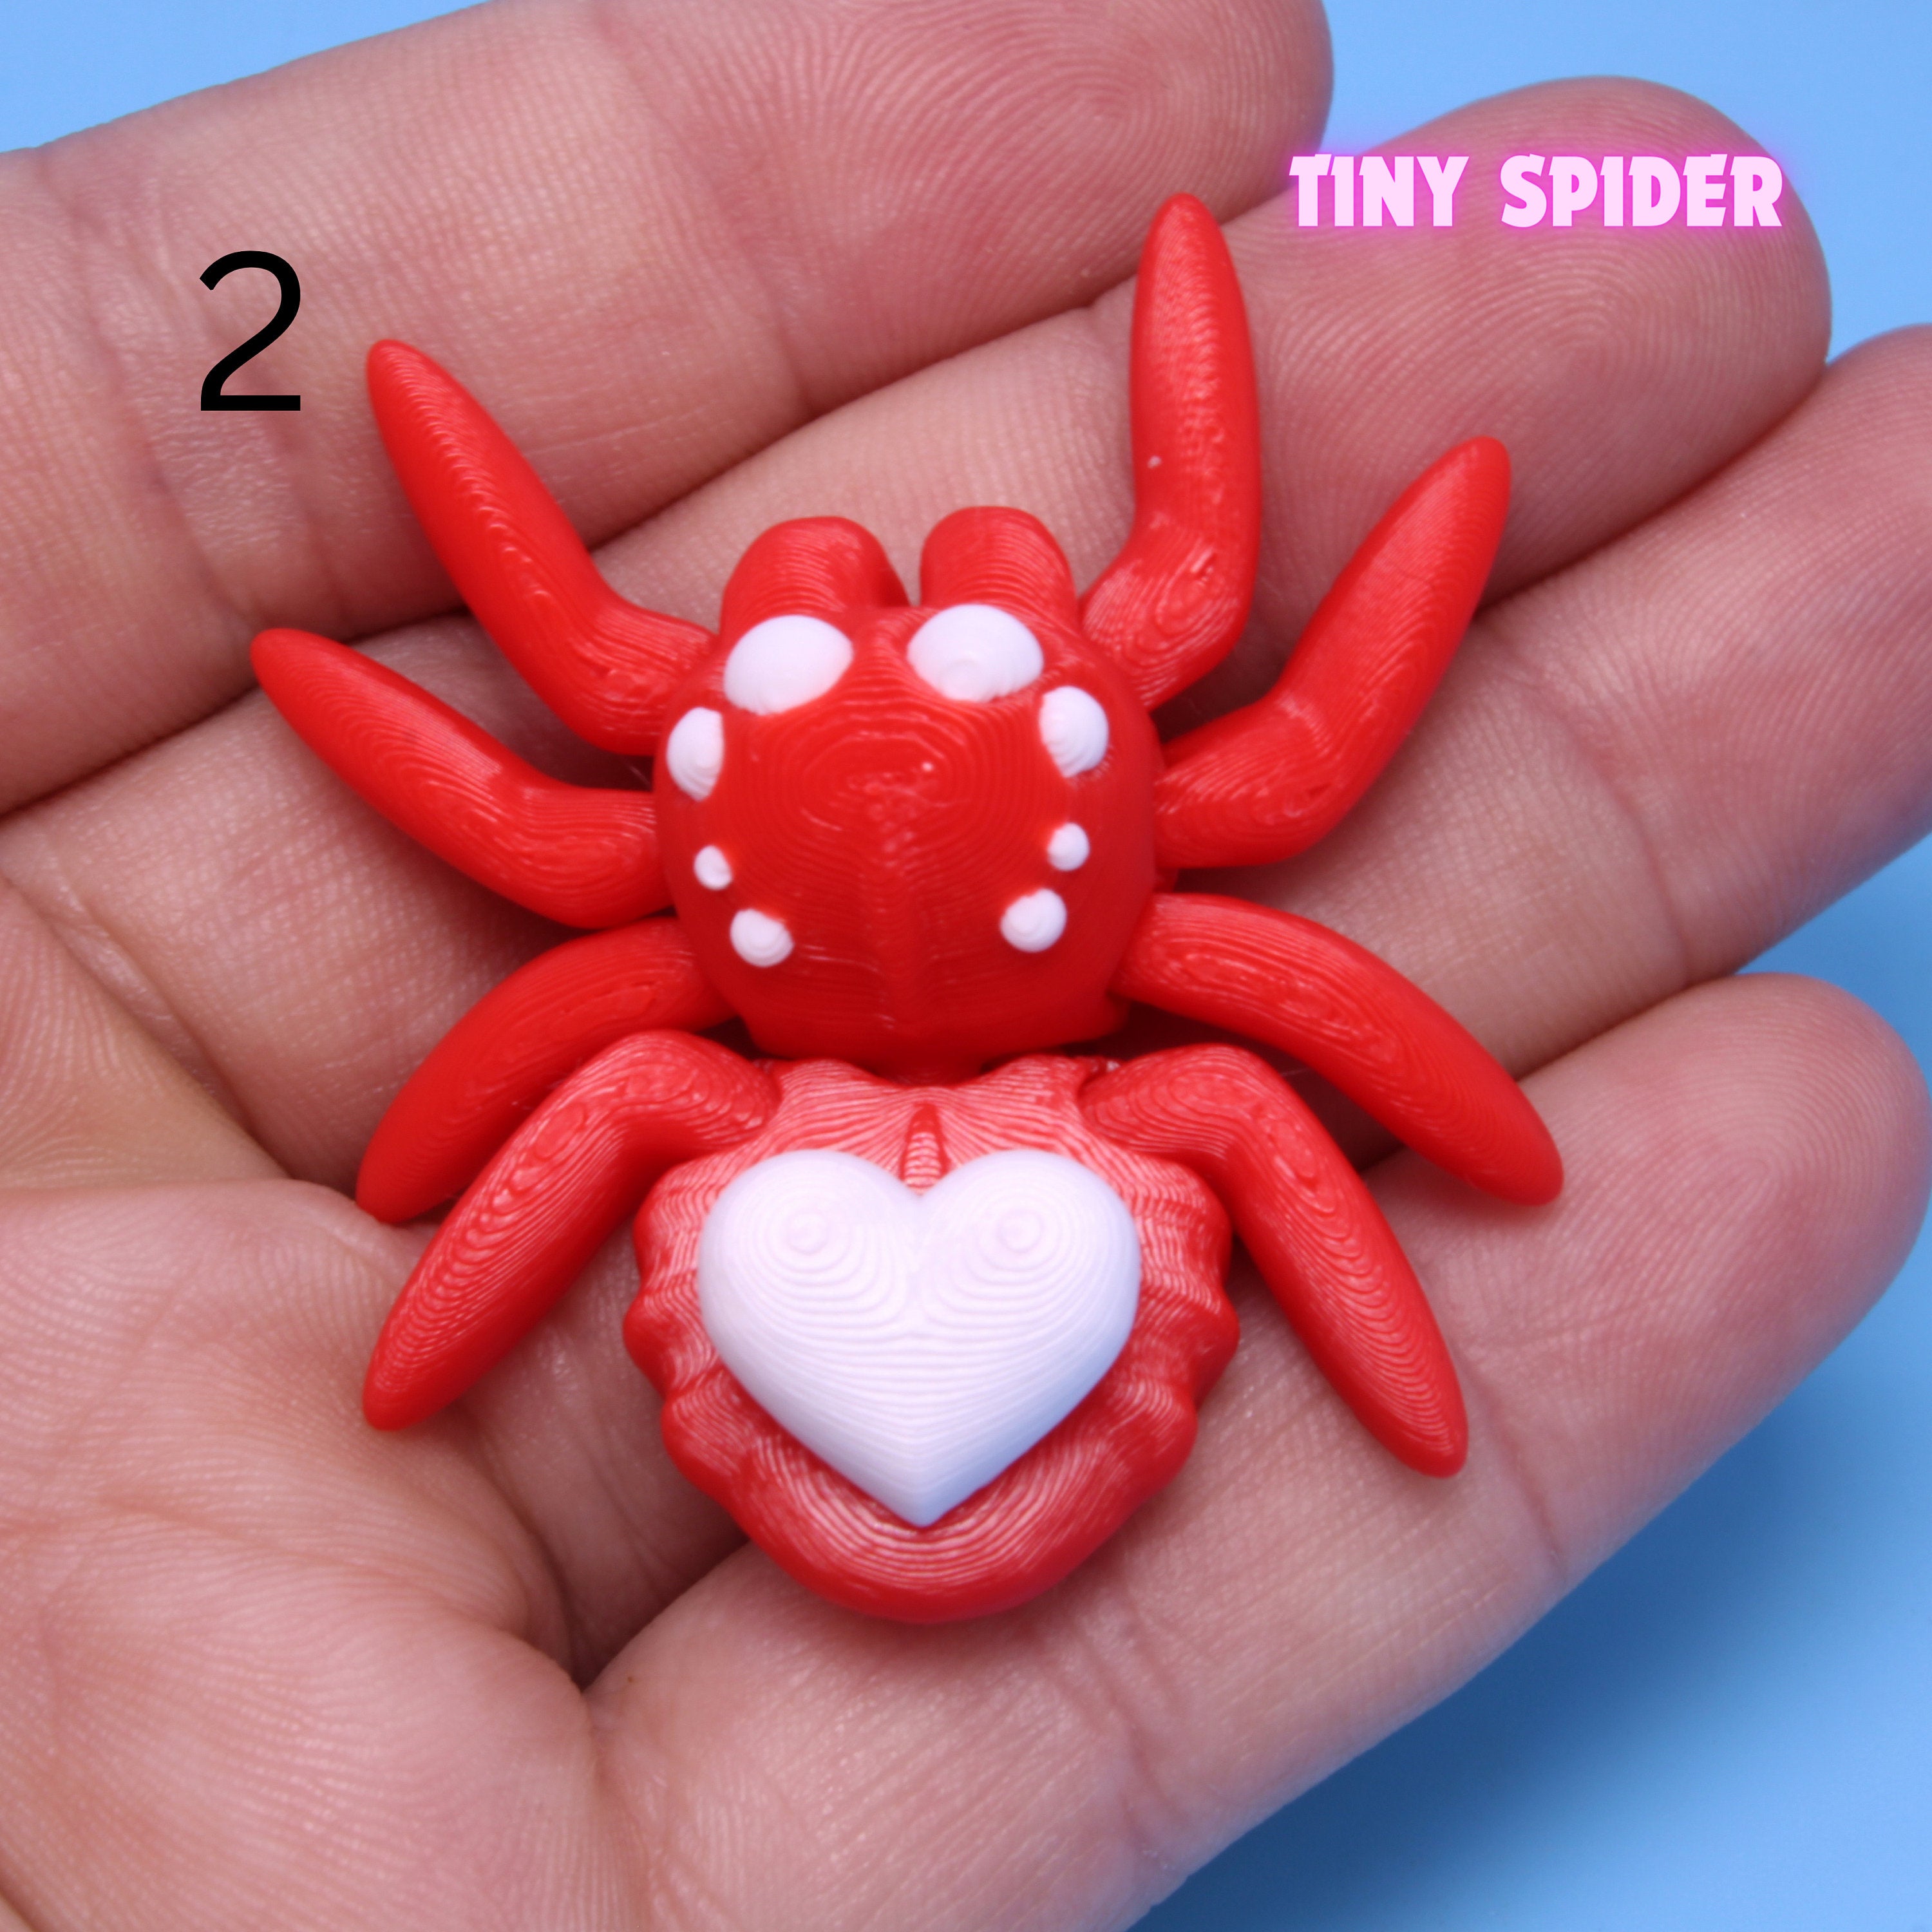 Tiny Spider with Heart - 3D printed